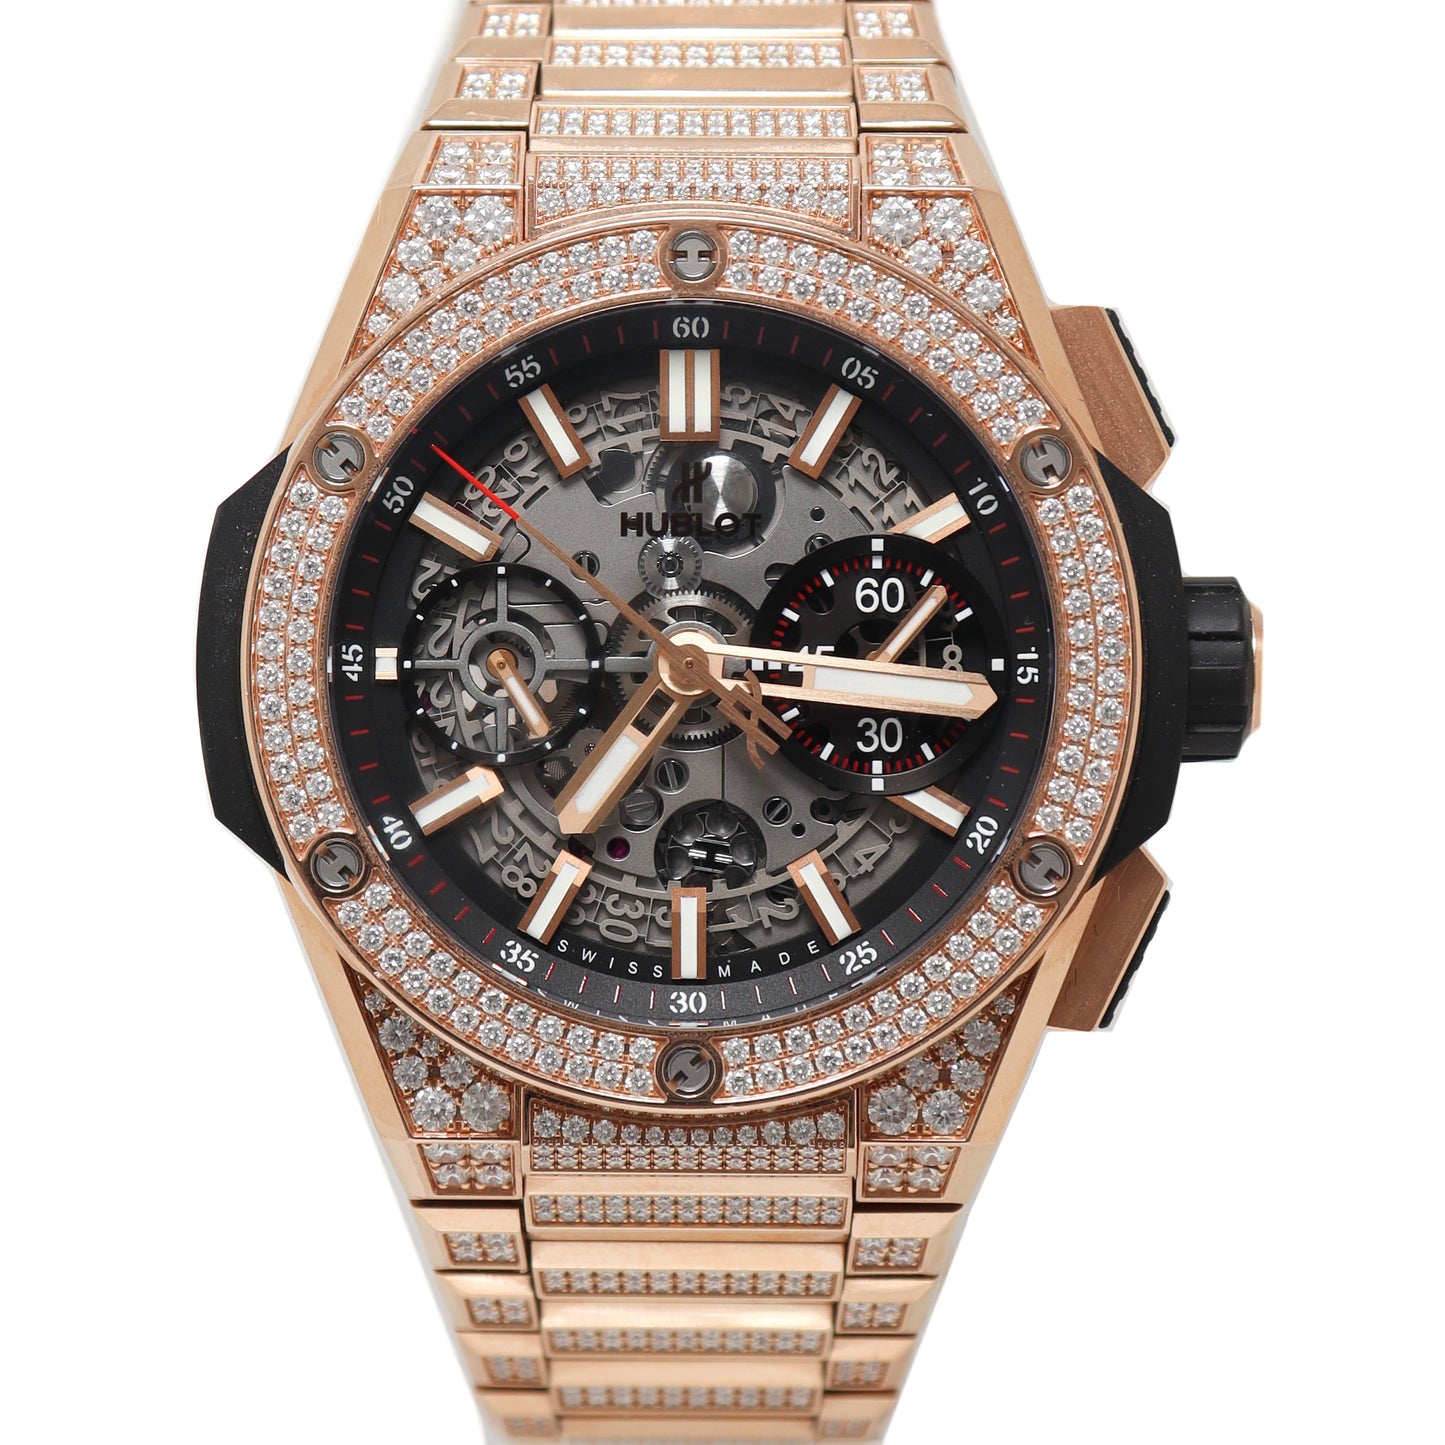 Hublot Mens Big Bang Integrated King Gold Pave Rose Gold Skeleton Dial Watch Matte Black Skeleton Dial Watch Reference# 451.OX.1180.OX.3704 - Happy Jewelers Fine Jewelry Lifetime Warranty